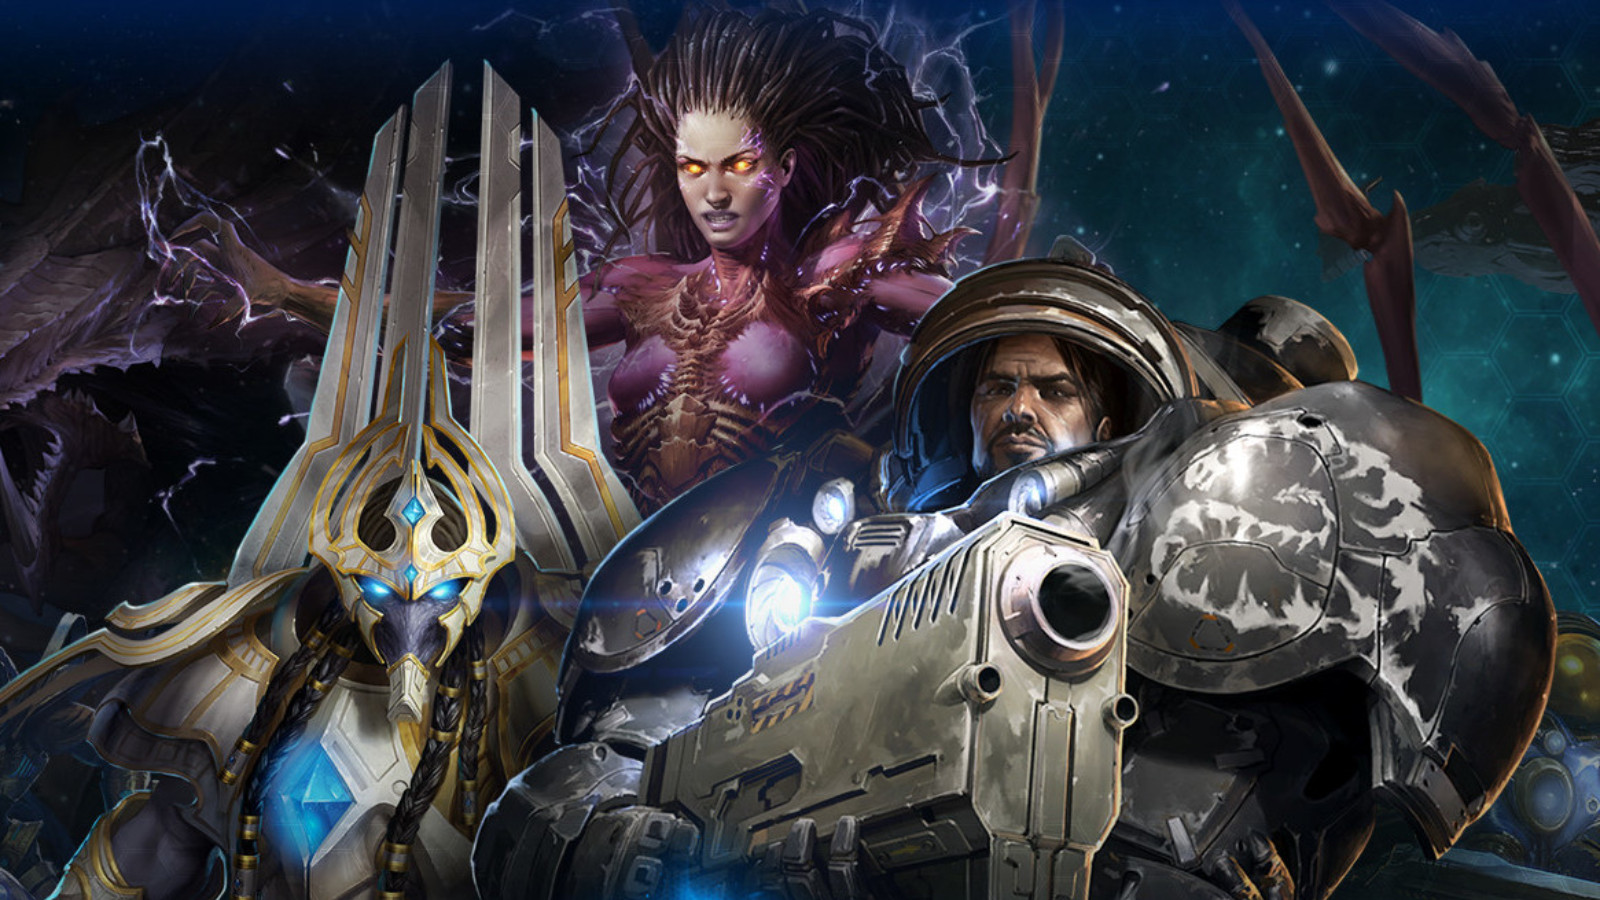 The original Starcraft game is now free!